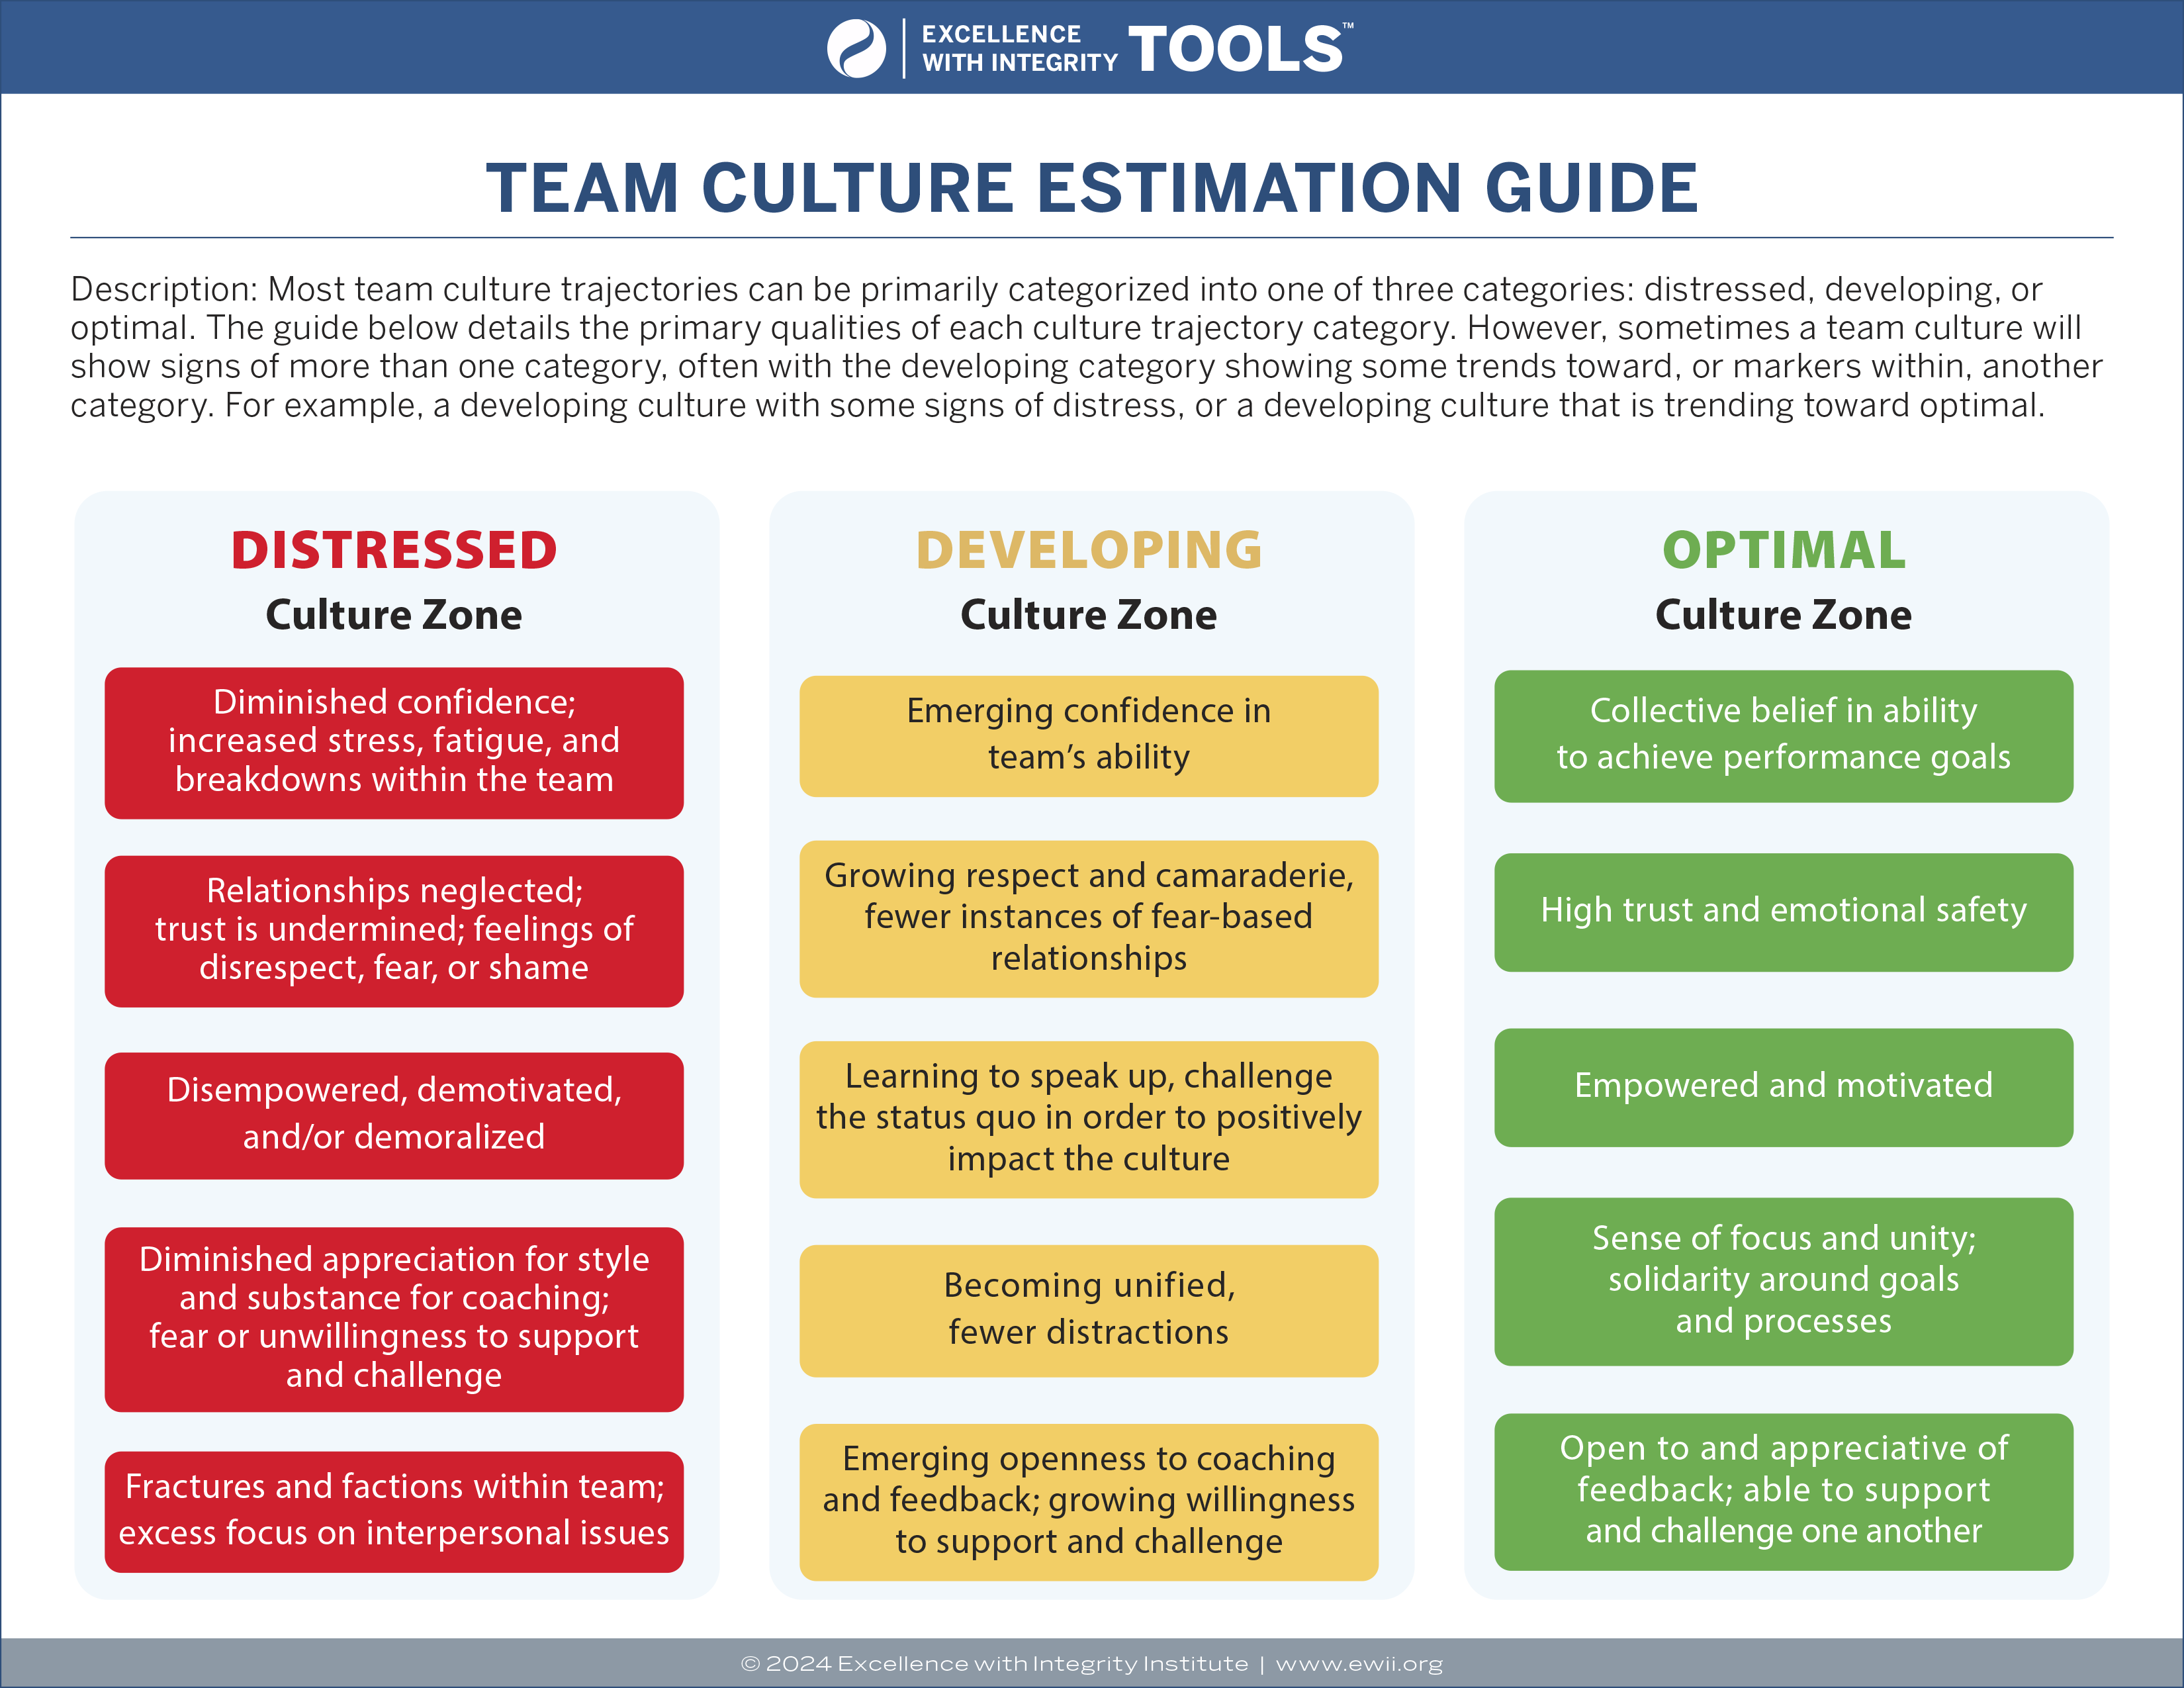 Team Culture and Identity in Sport